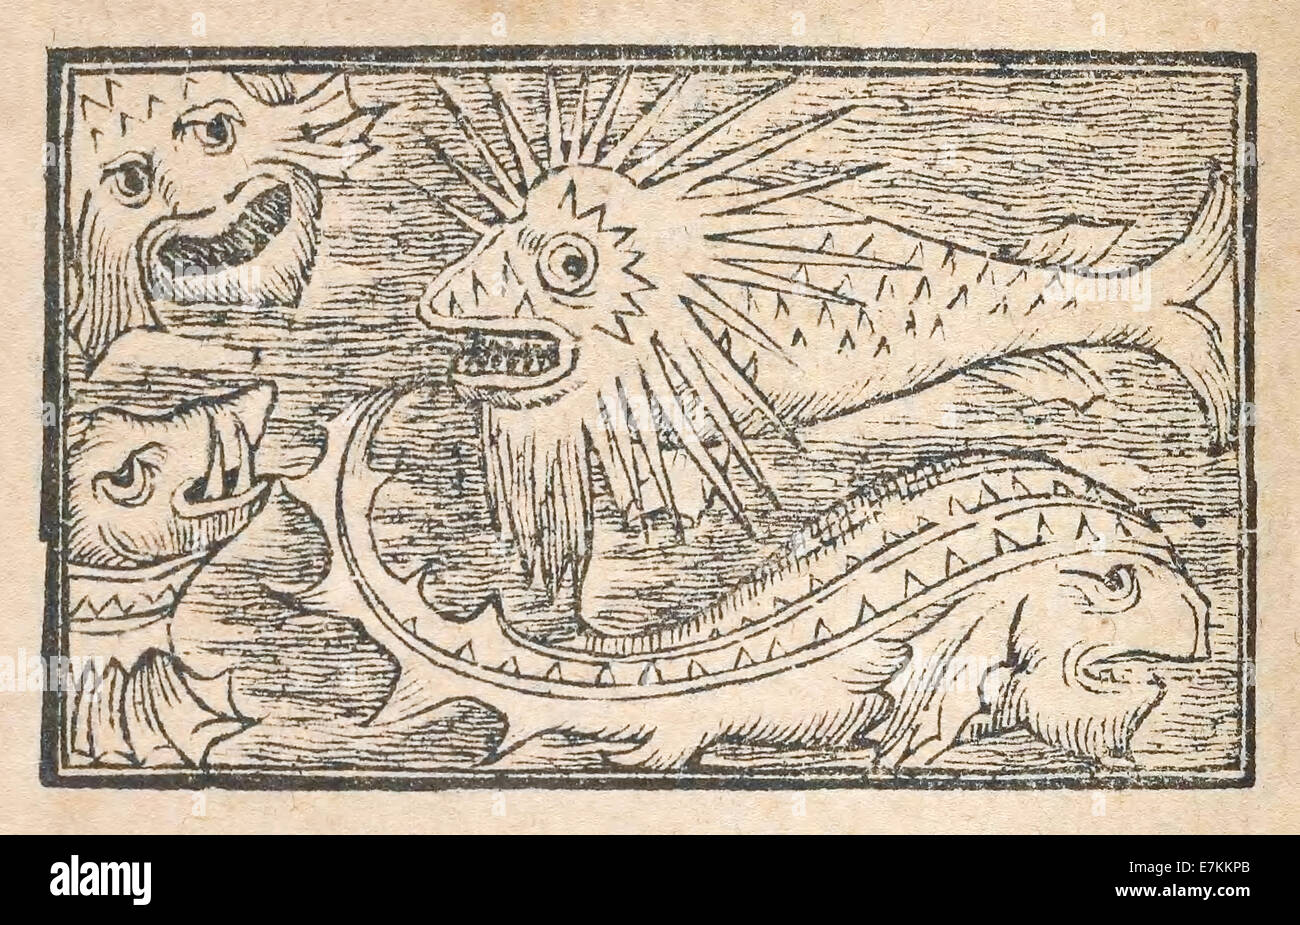 Sea monsters off Norway, illustrated by Olaus Magnus (1490-1557) published in 1555. See description for more information. Stock Photo